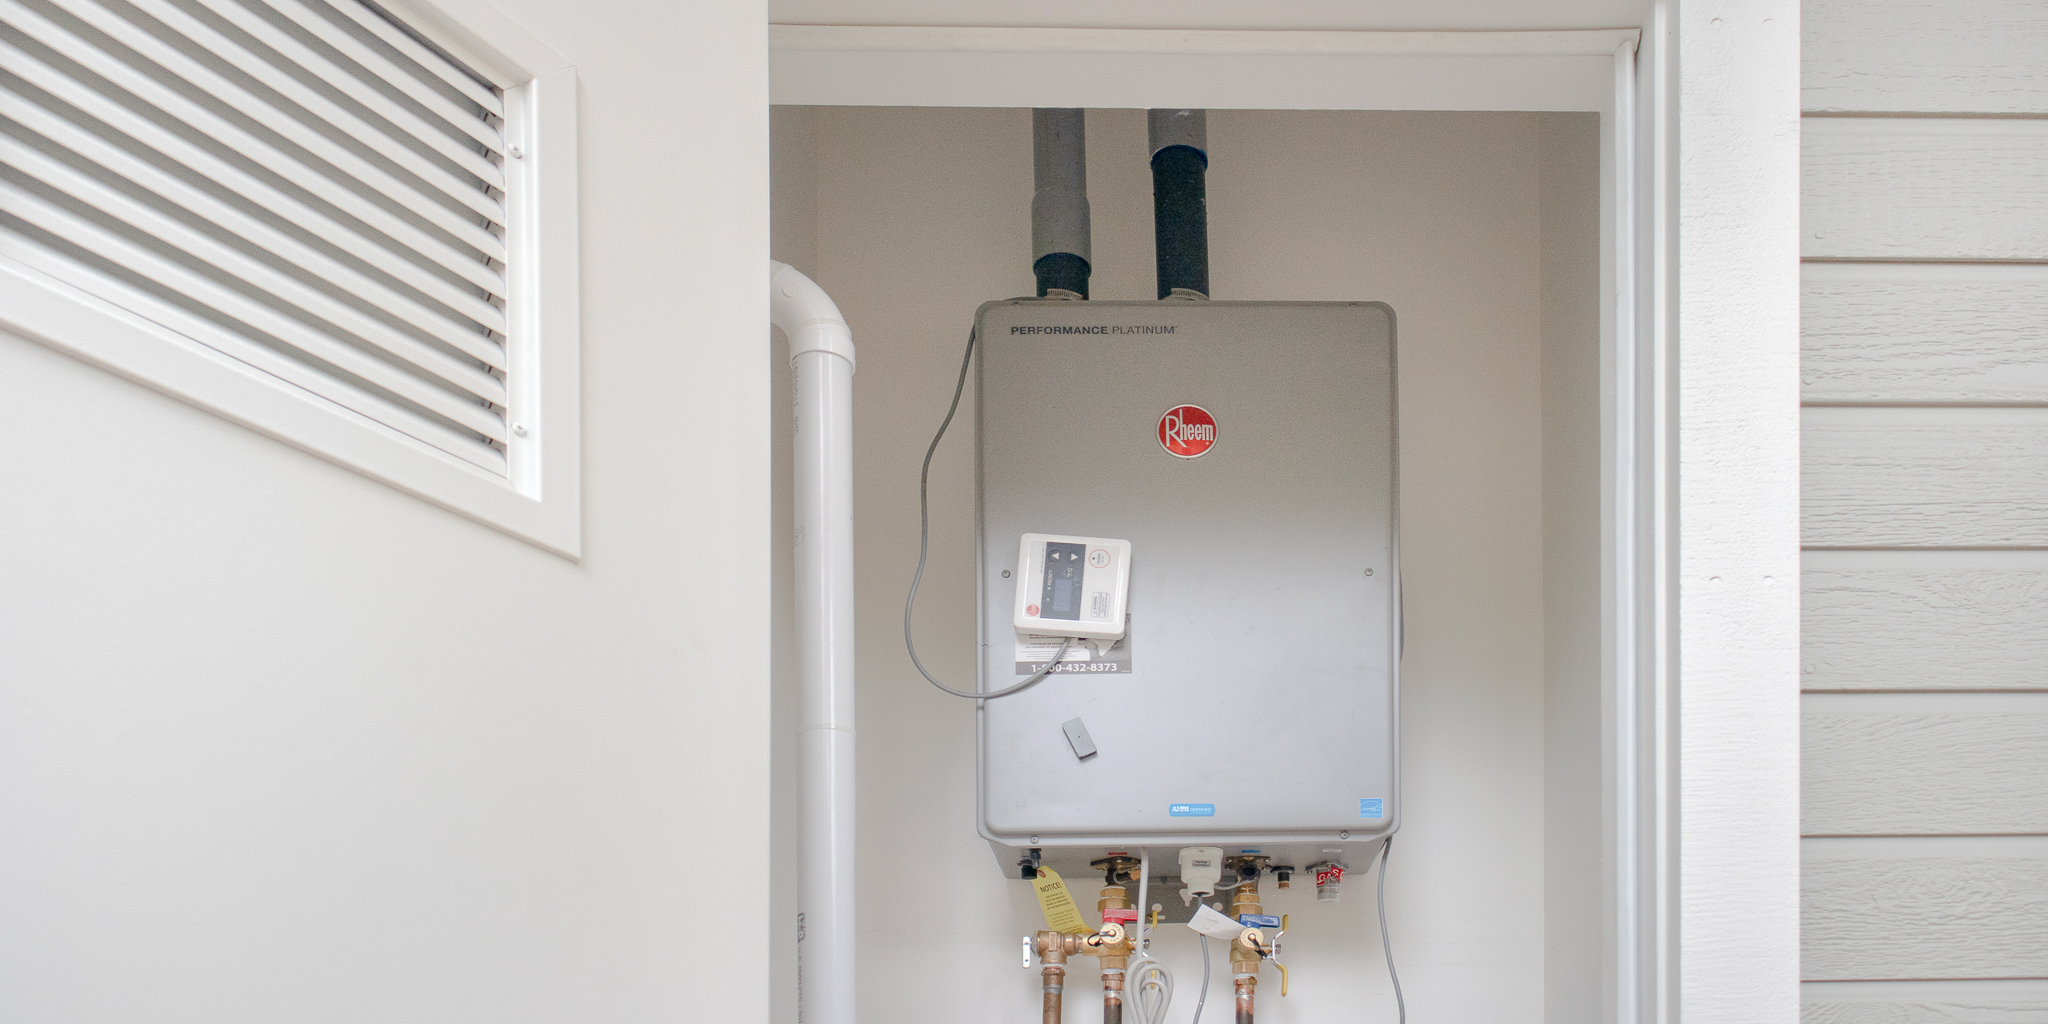 Tankless hot water system in California ADU design by Housable